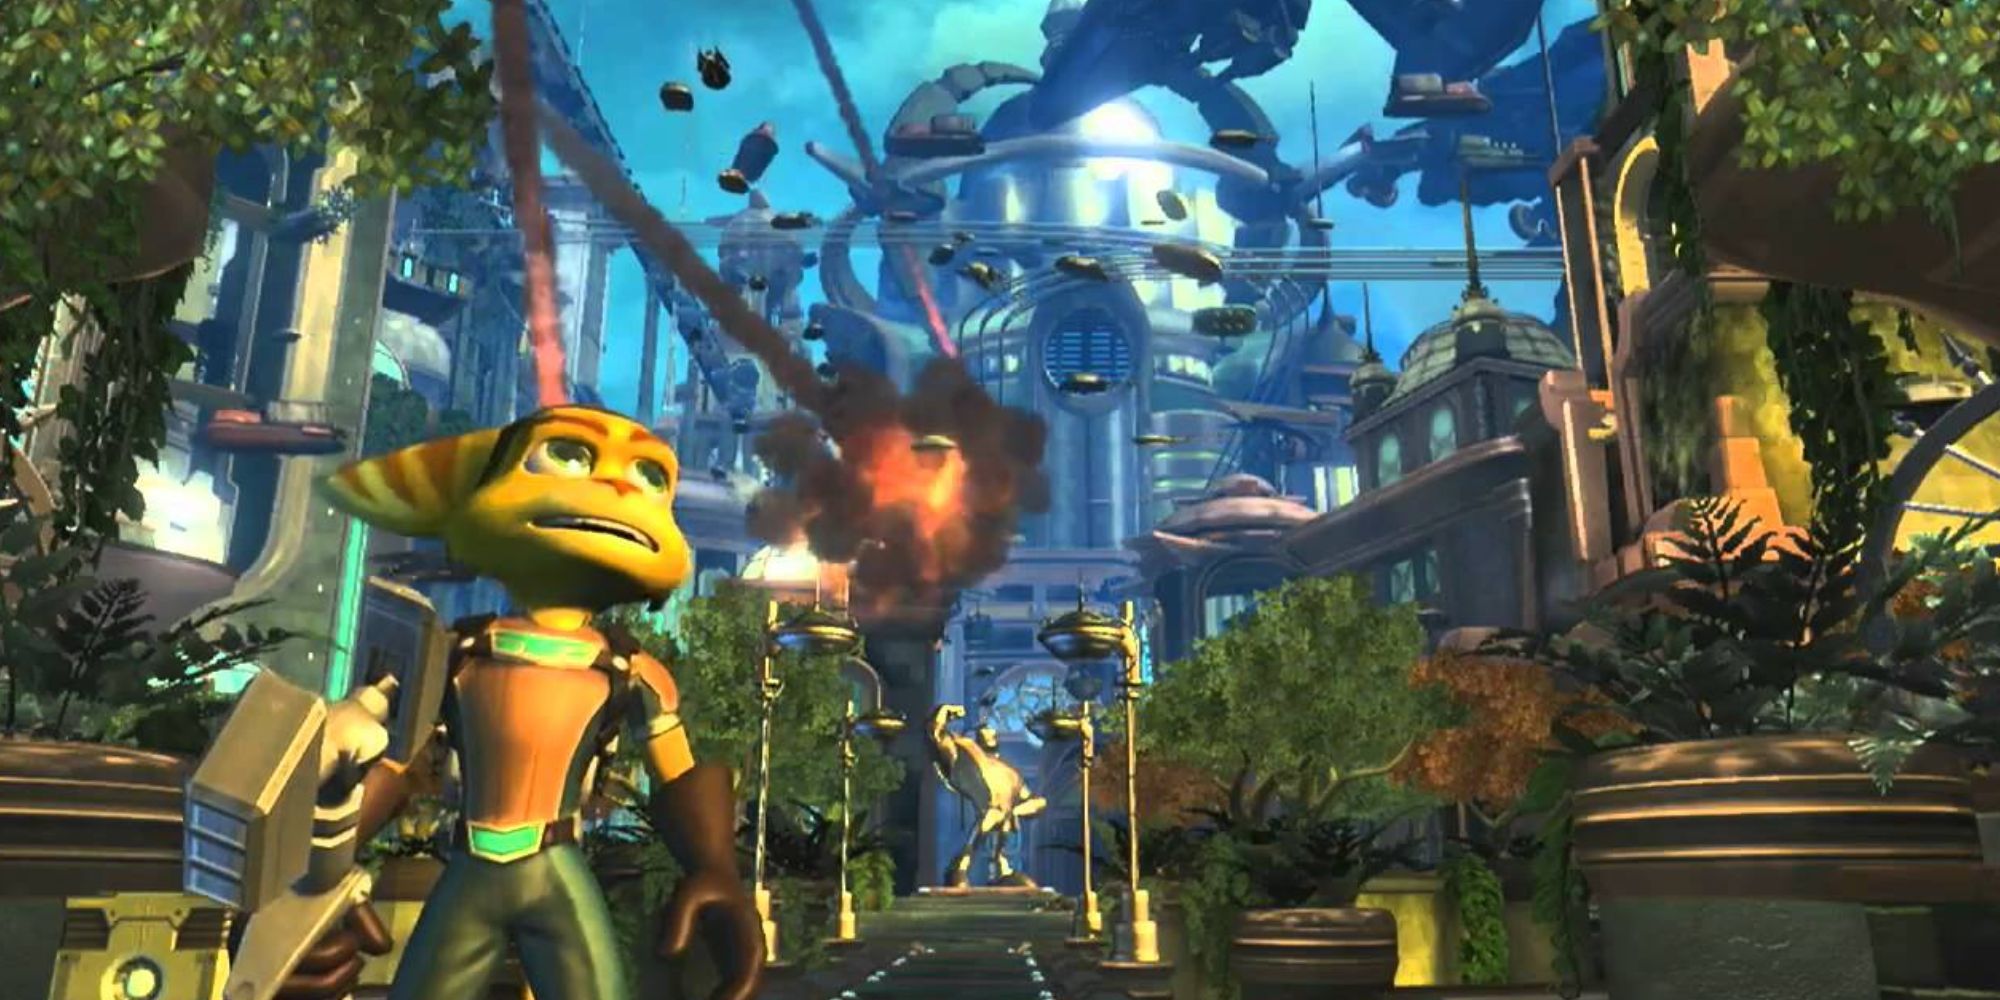 PlayStation Plus Premium is adding 5 more Ratchet & Clank games this month